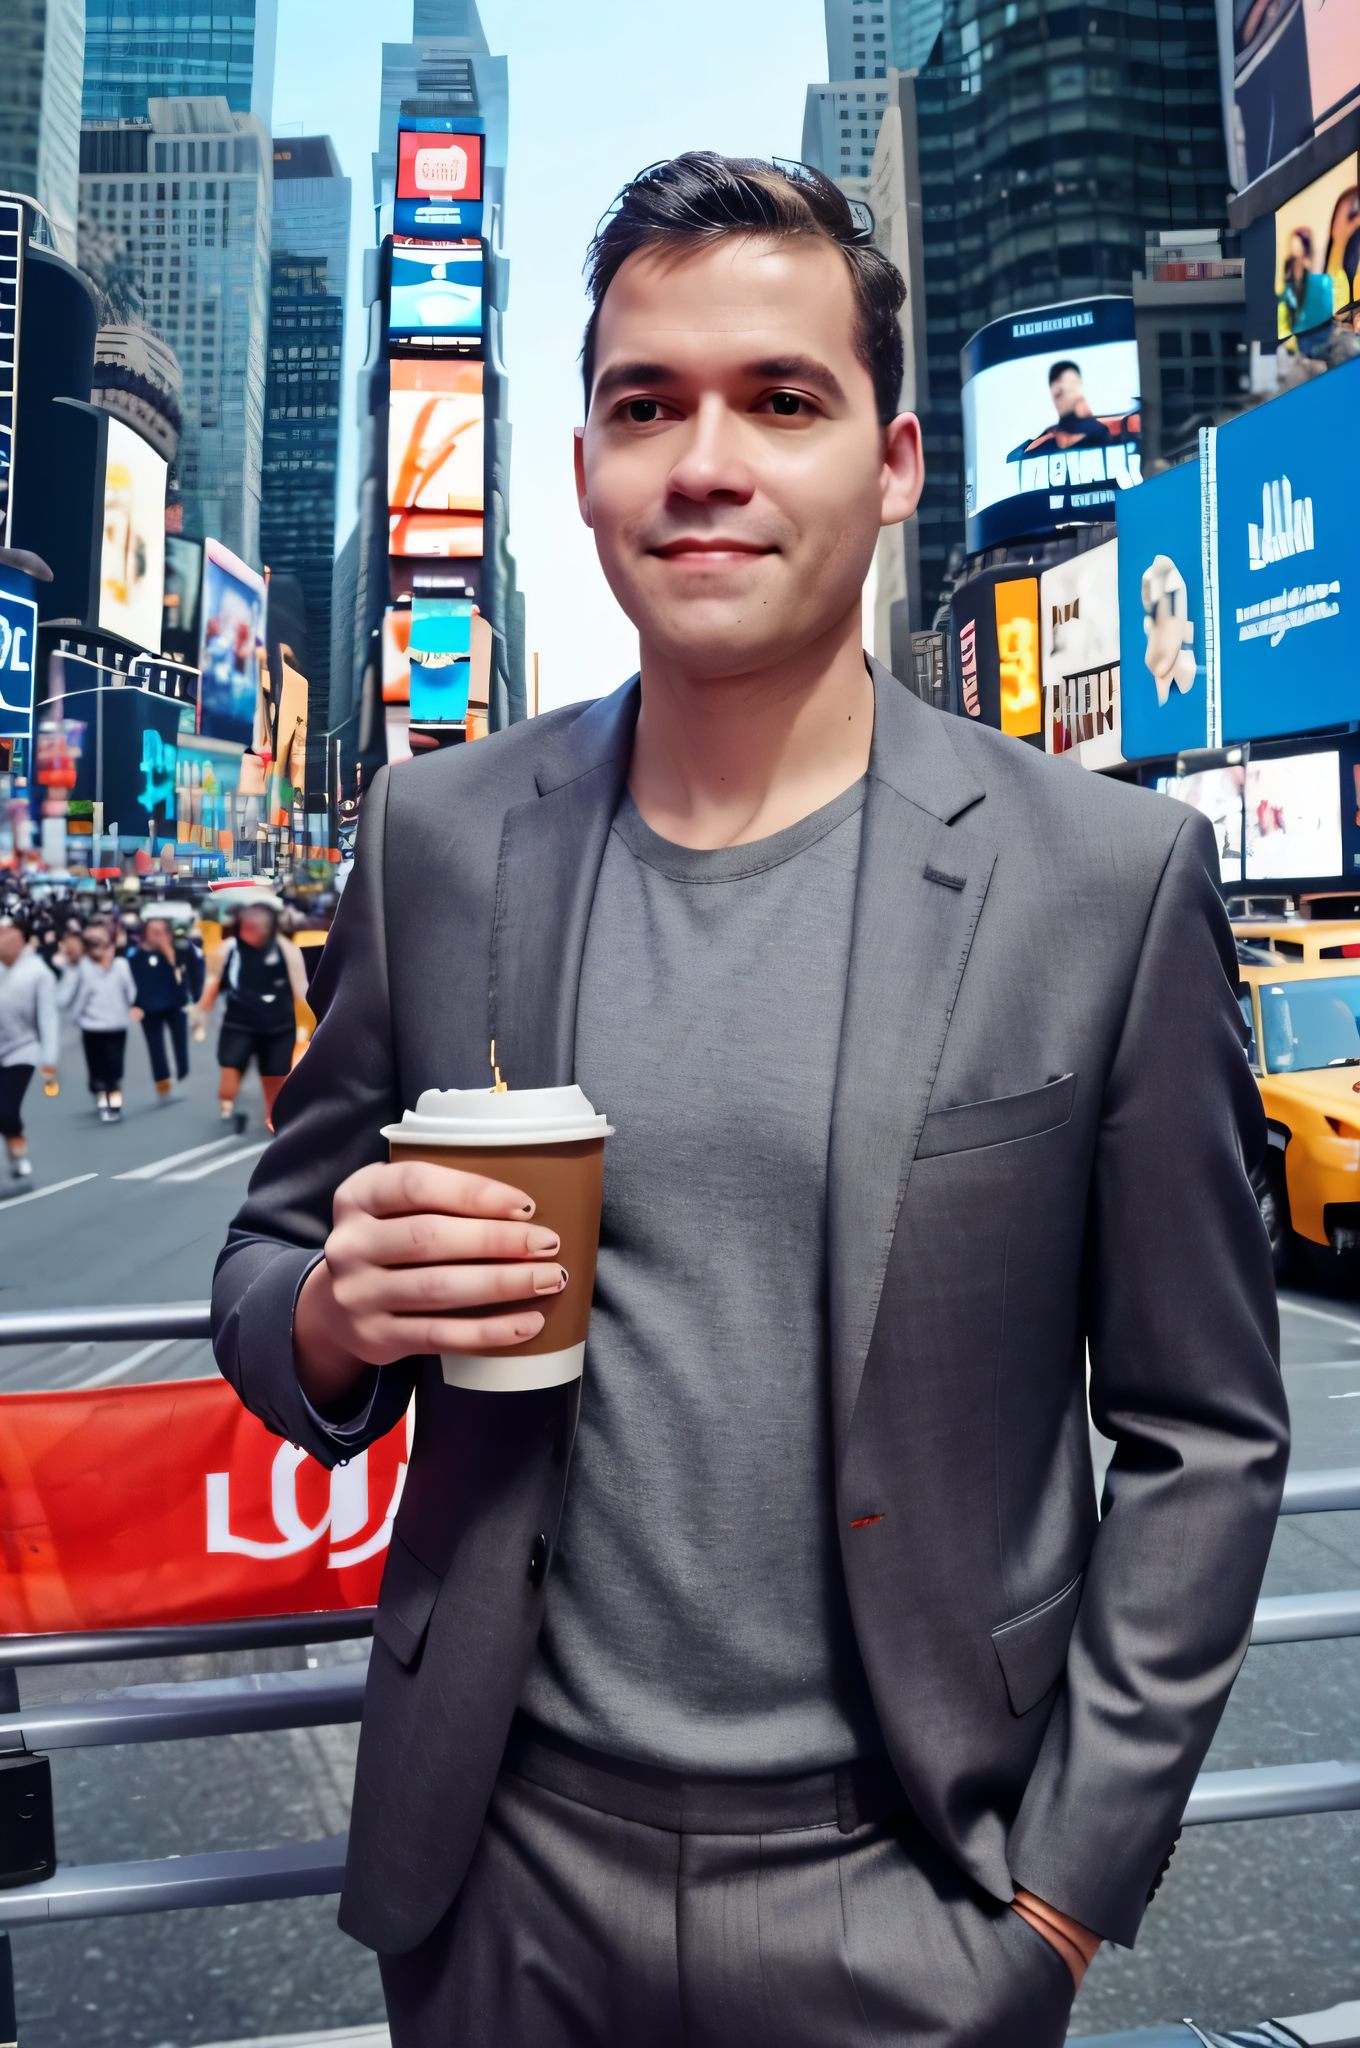 male self portrait wearing casual suit, holding coffee cup , background outdoor at times square new york